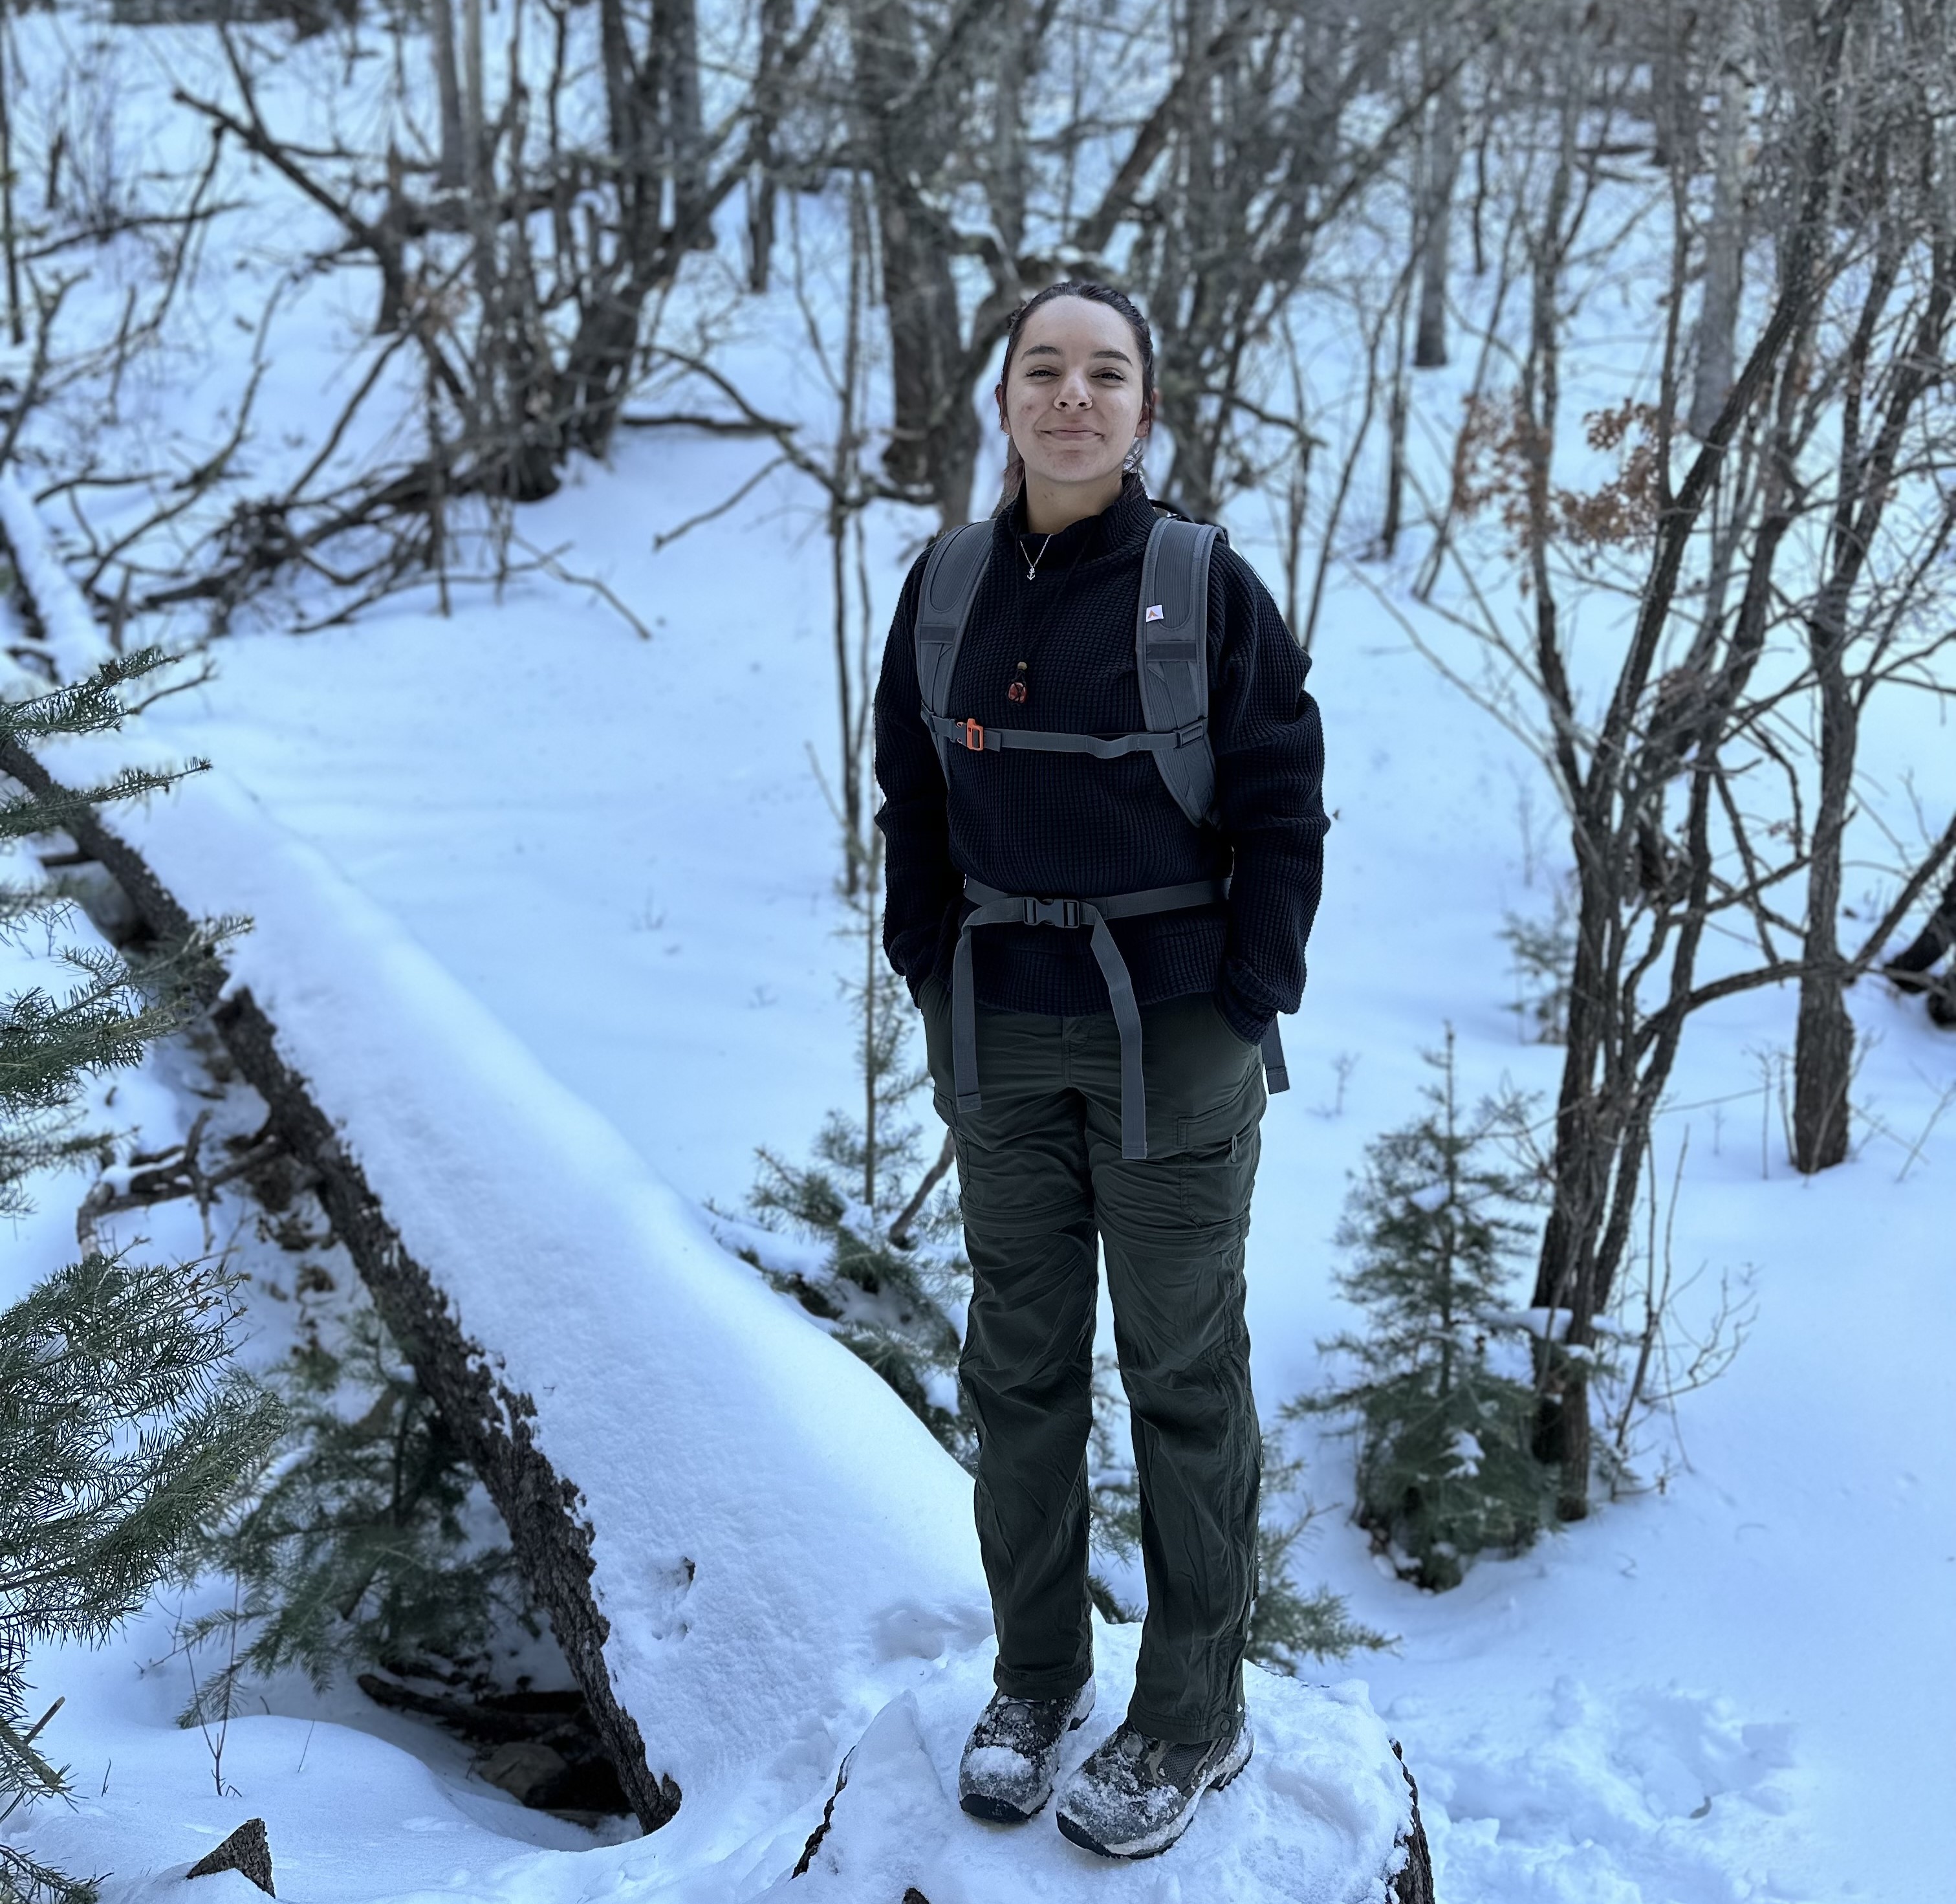 Emma Varel standing on a fallen, snow-covered tree surrounded by trees and snow.